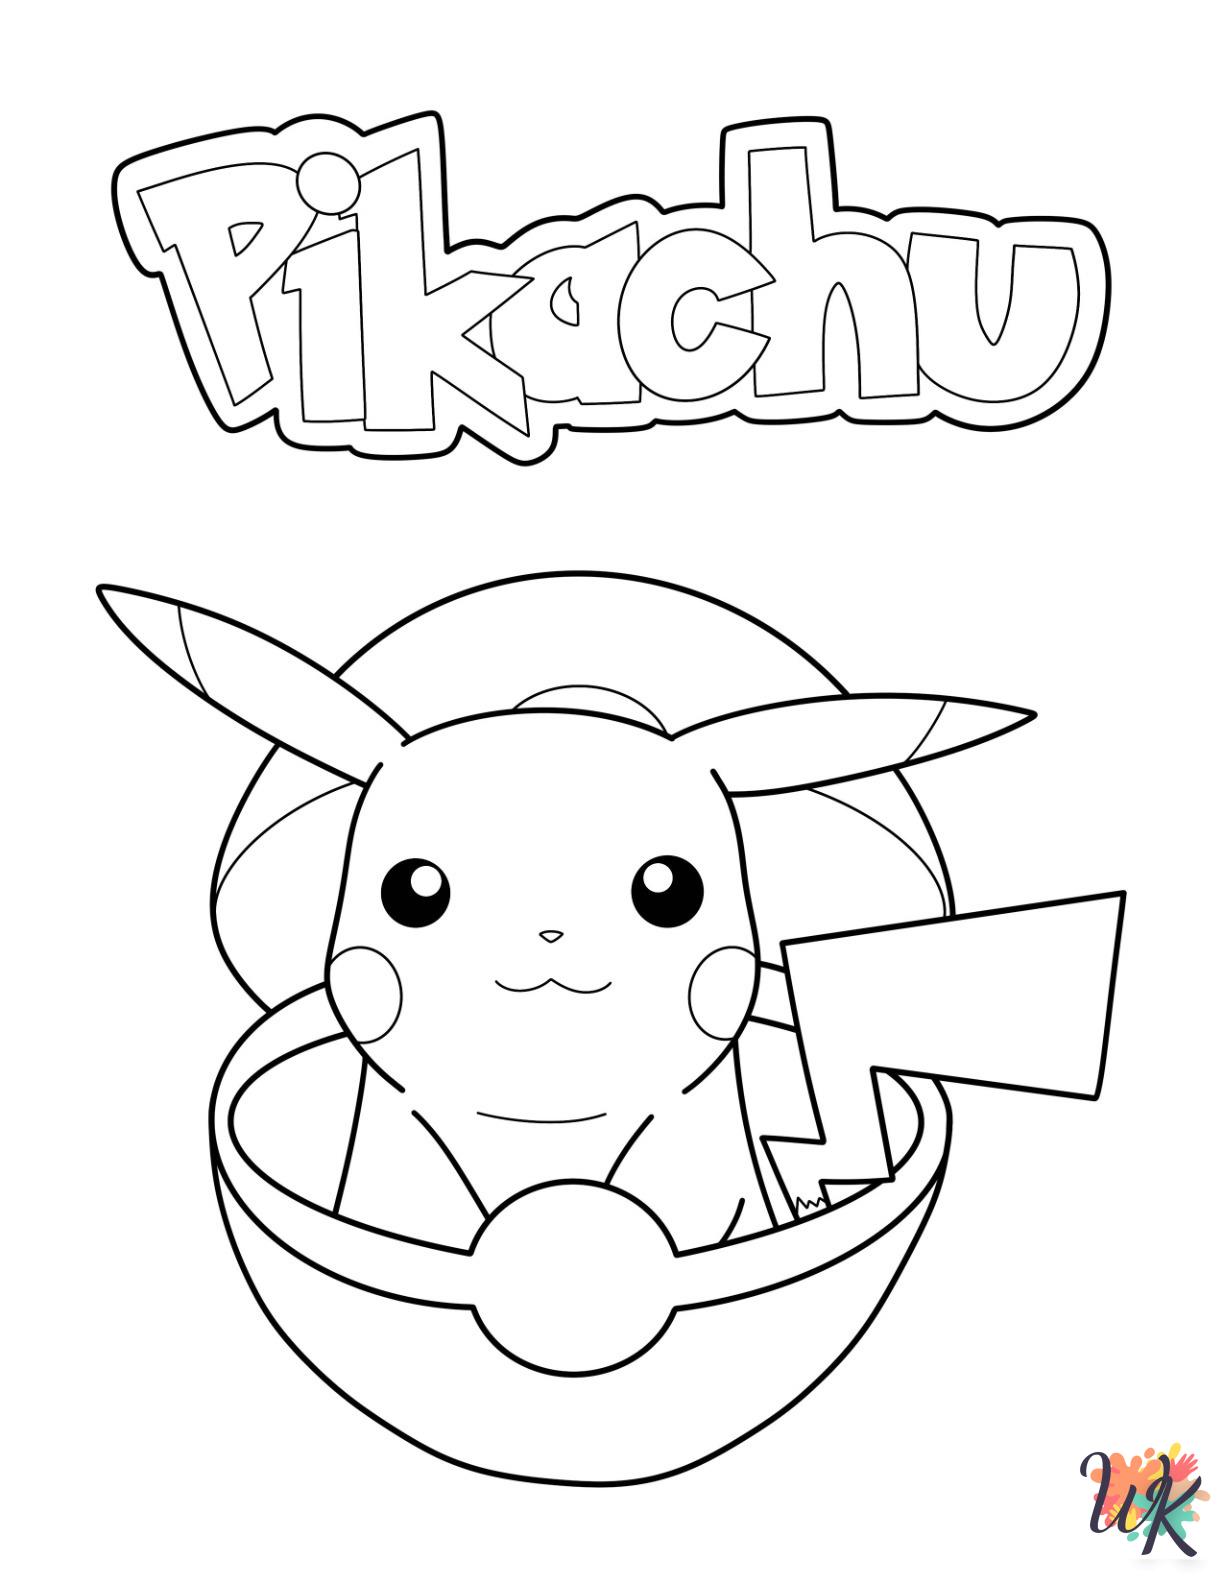 Pokeball cards coloring pages